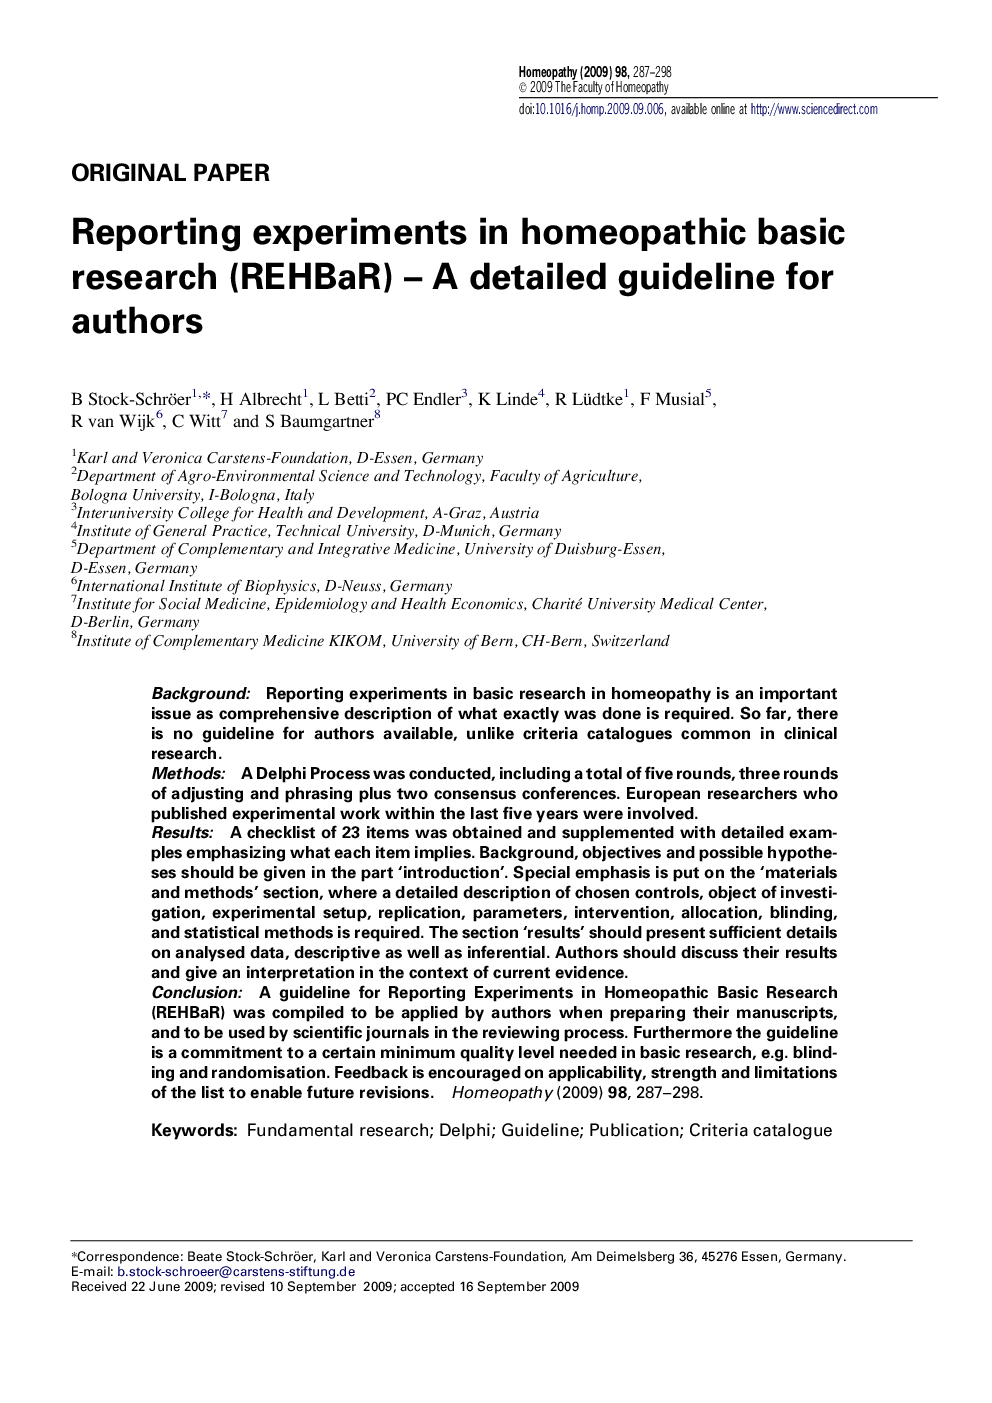 Reporting experiments in homeopathic basic research (REHBaR) – A detailed guideline for authors